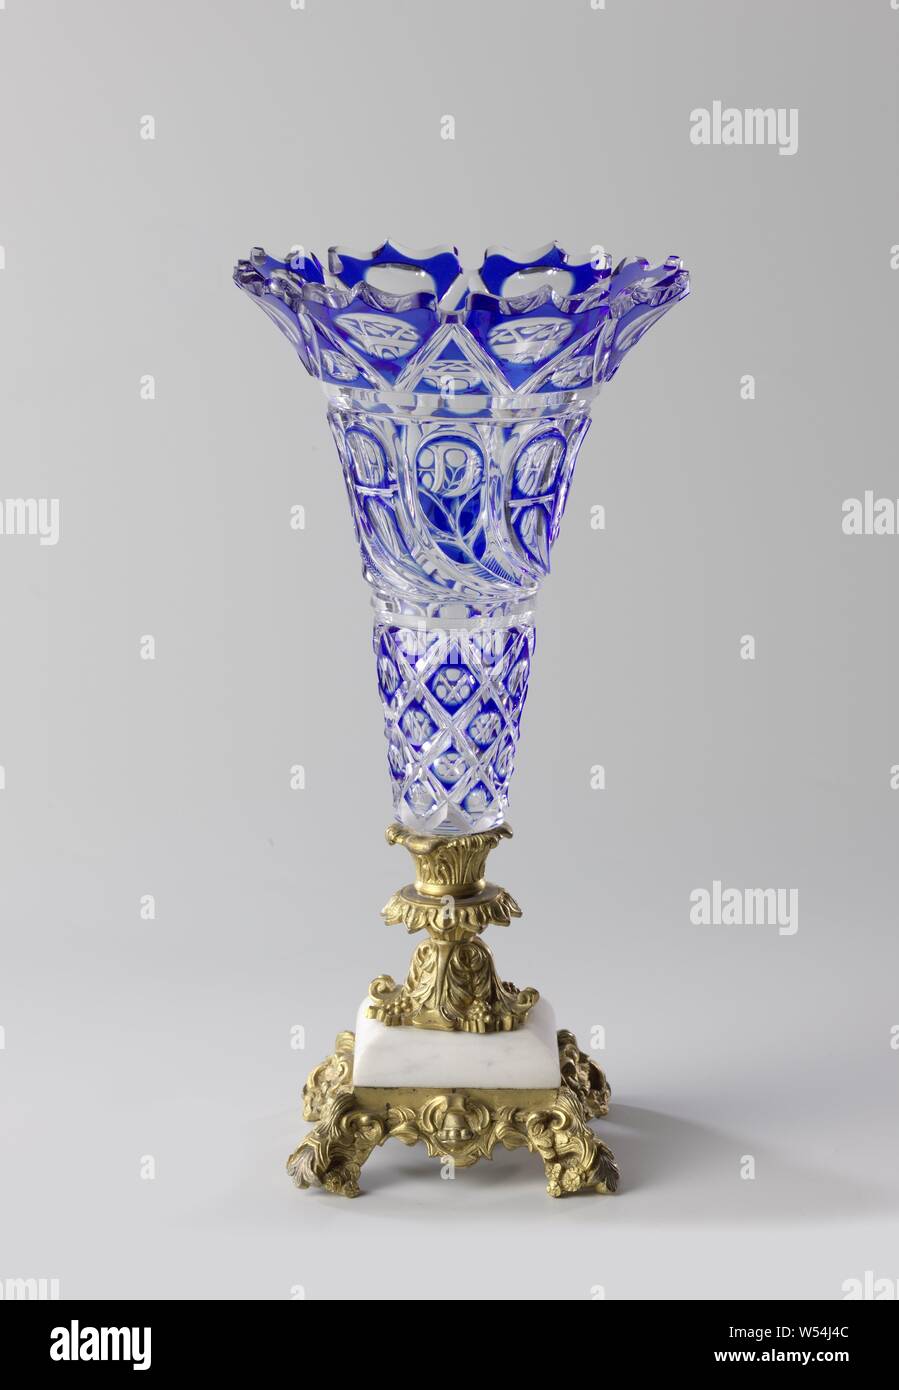 Vase with cobalt blue Überfang with cut decoration, Square, gilt bronze  base and stem in neo-Renaissance style with gray-veined marble spacer.  Trumpet-shaped chalice of clear colorless glass with a cobalt blue Überfang,